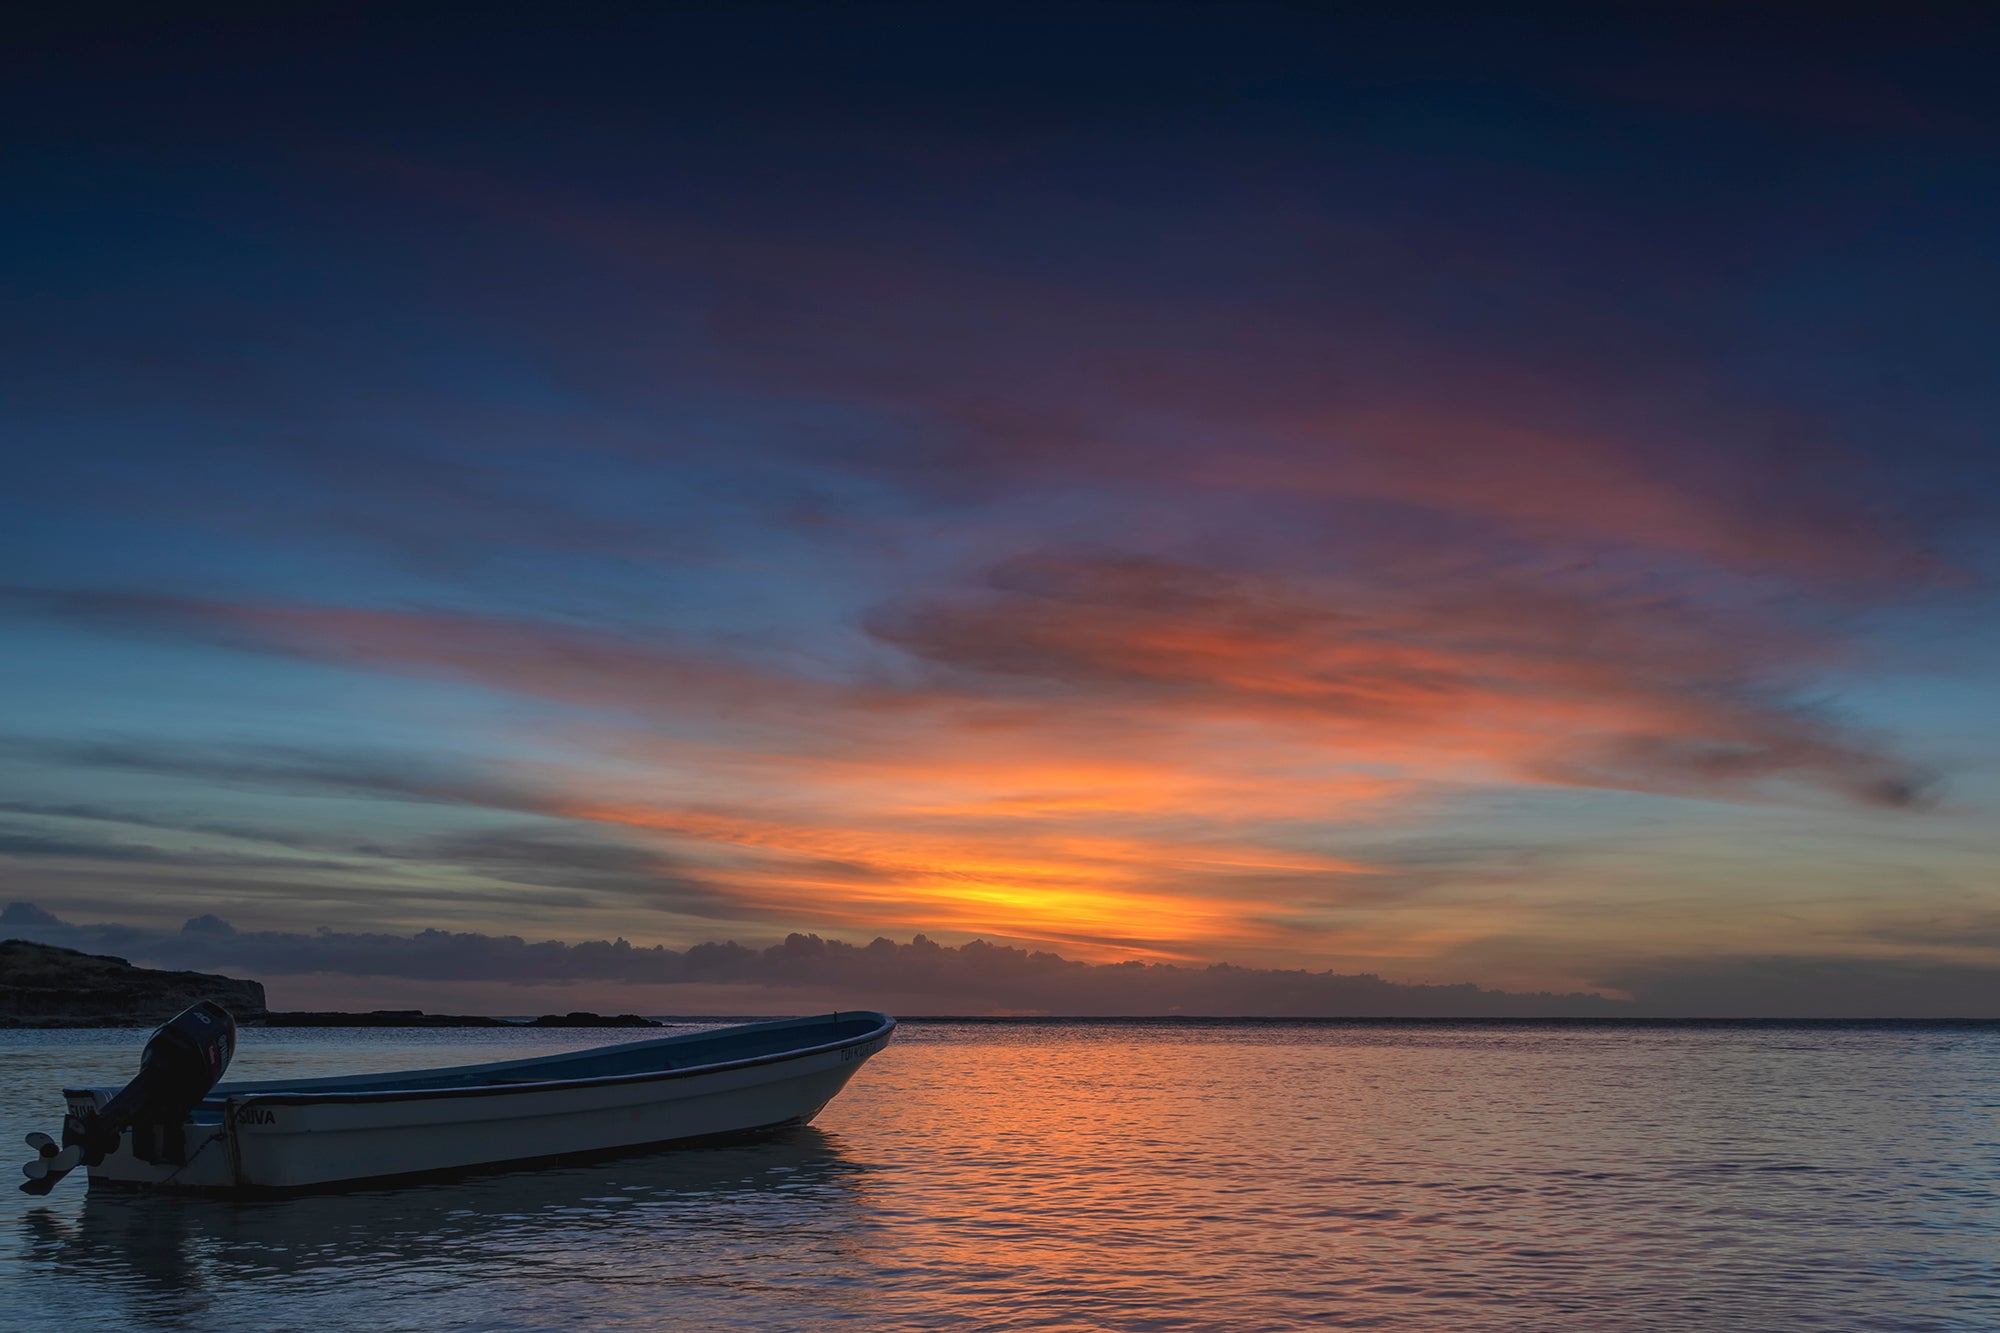 An image of a sunset in Fiji with a local fishing boat sitting alone in the forground.